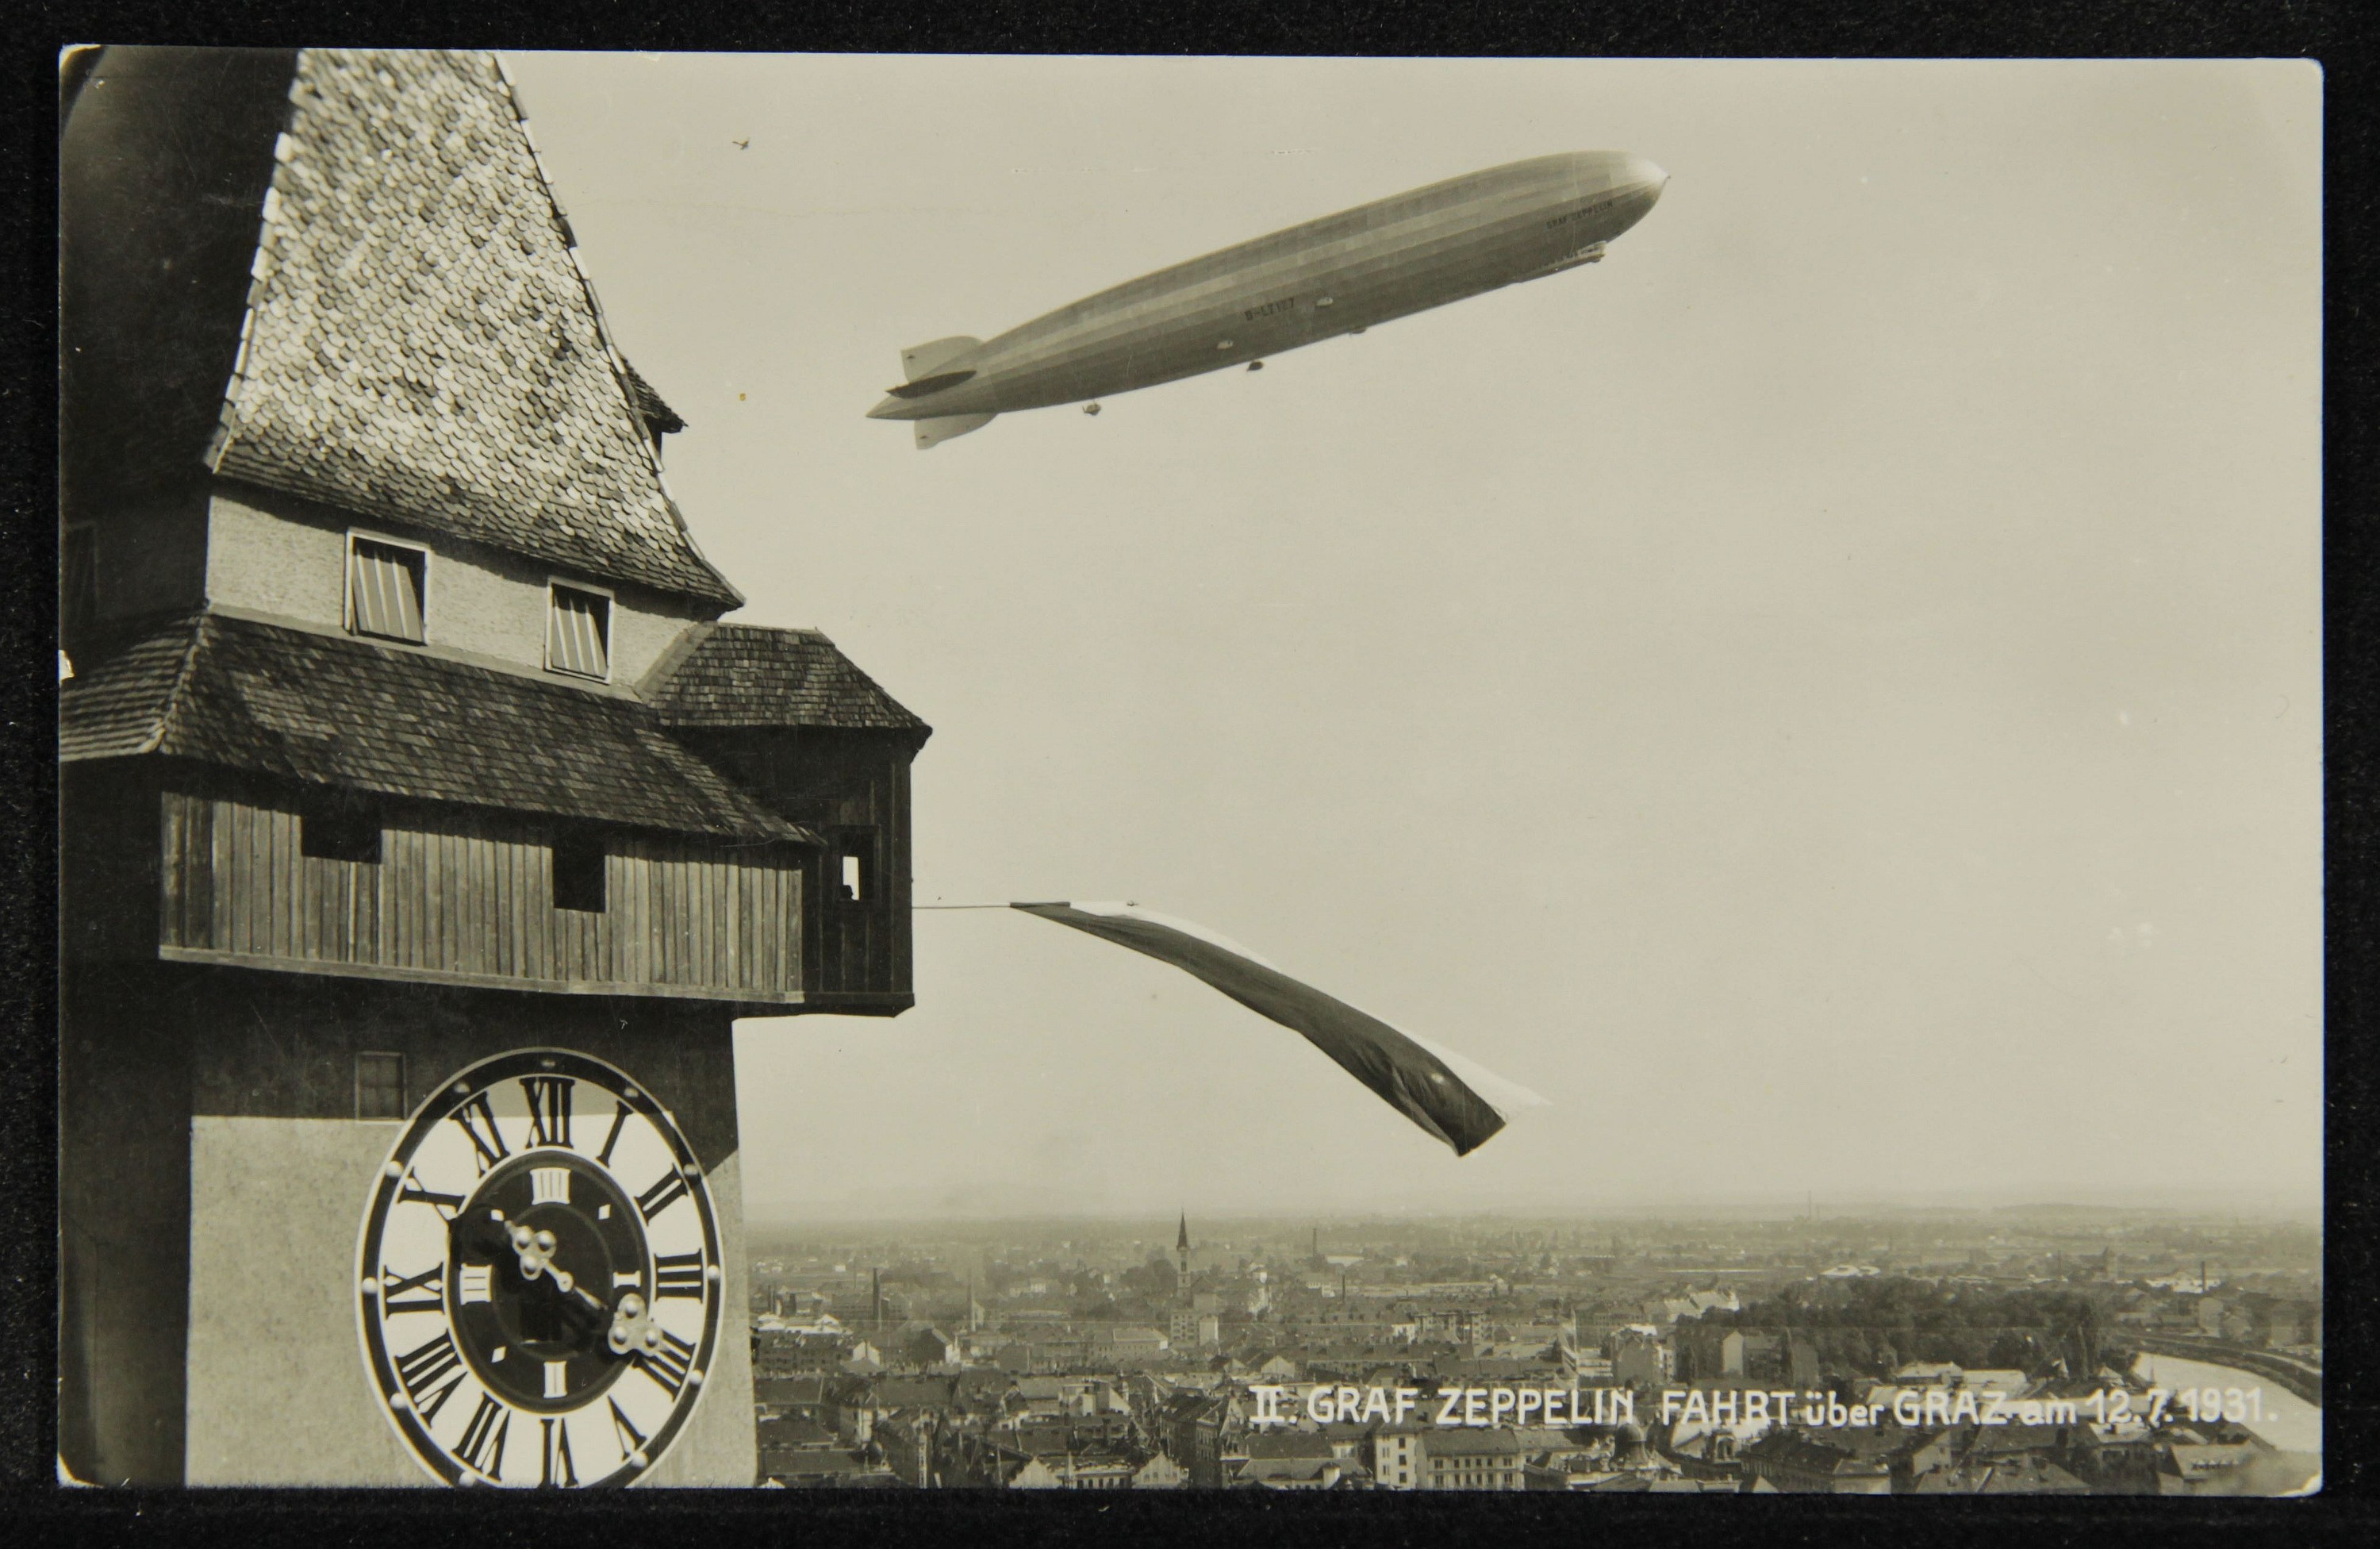 Ii. Graf Zeppelin's ride over the grass on 12.7.1931